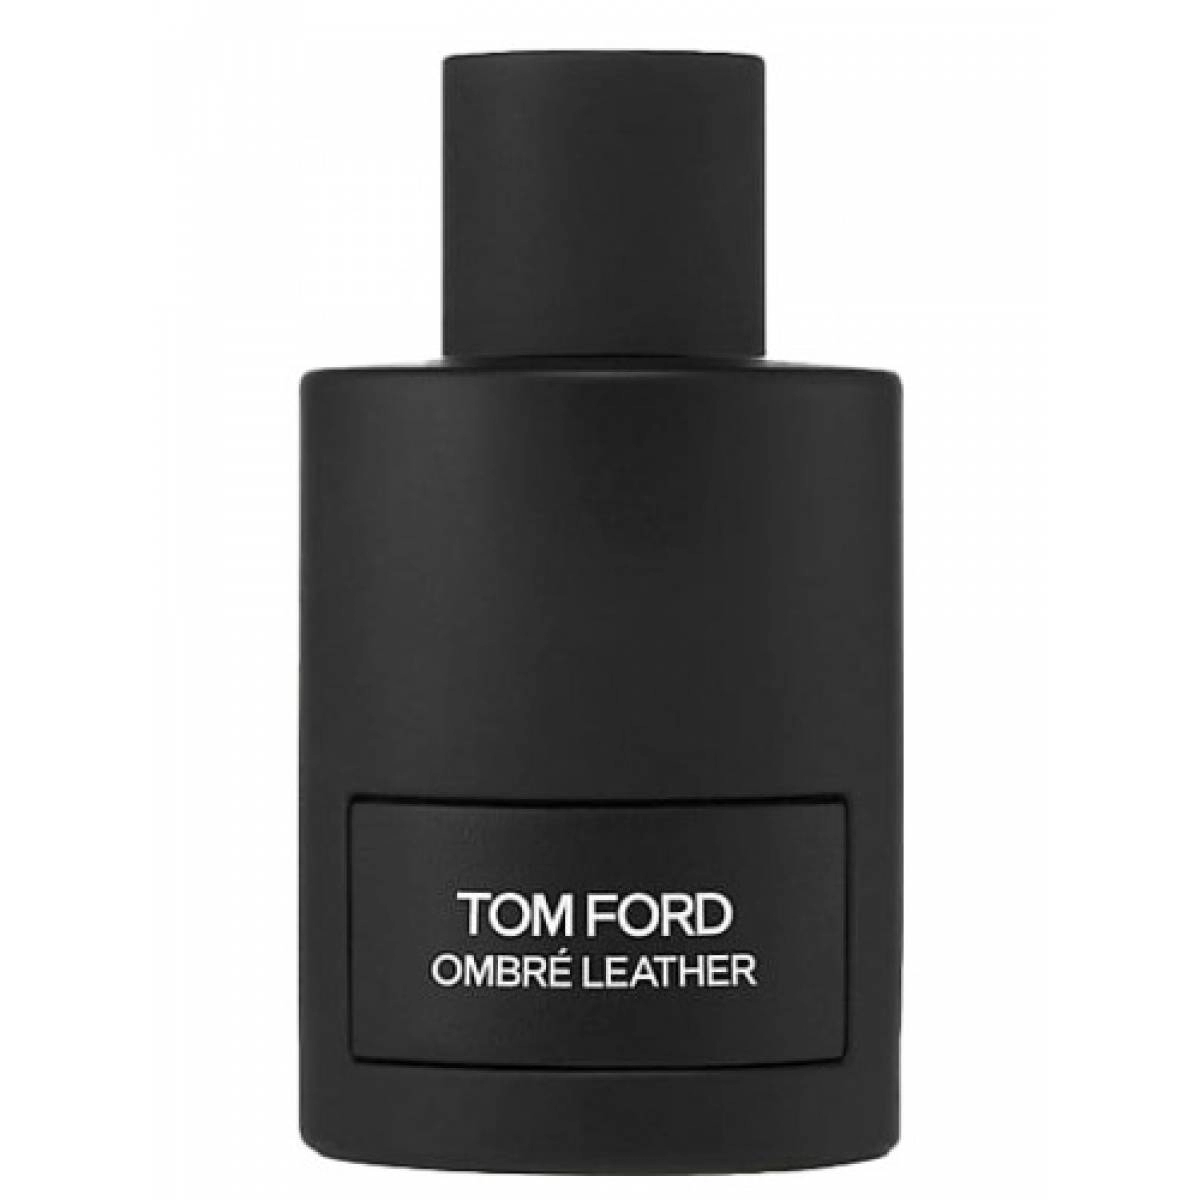 Tom Ford Ombre Leather 100 ml edp (u)